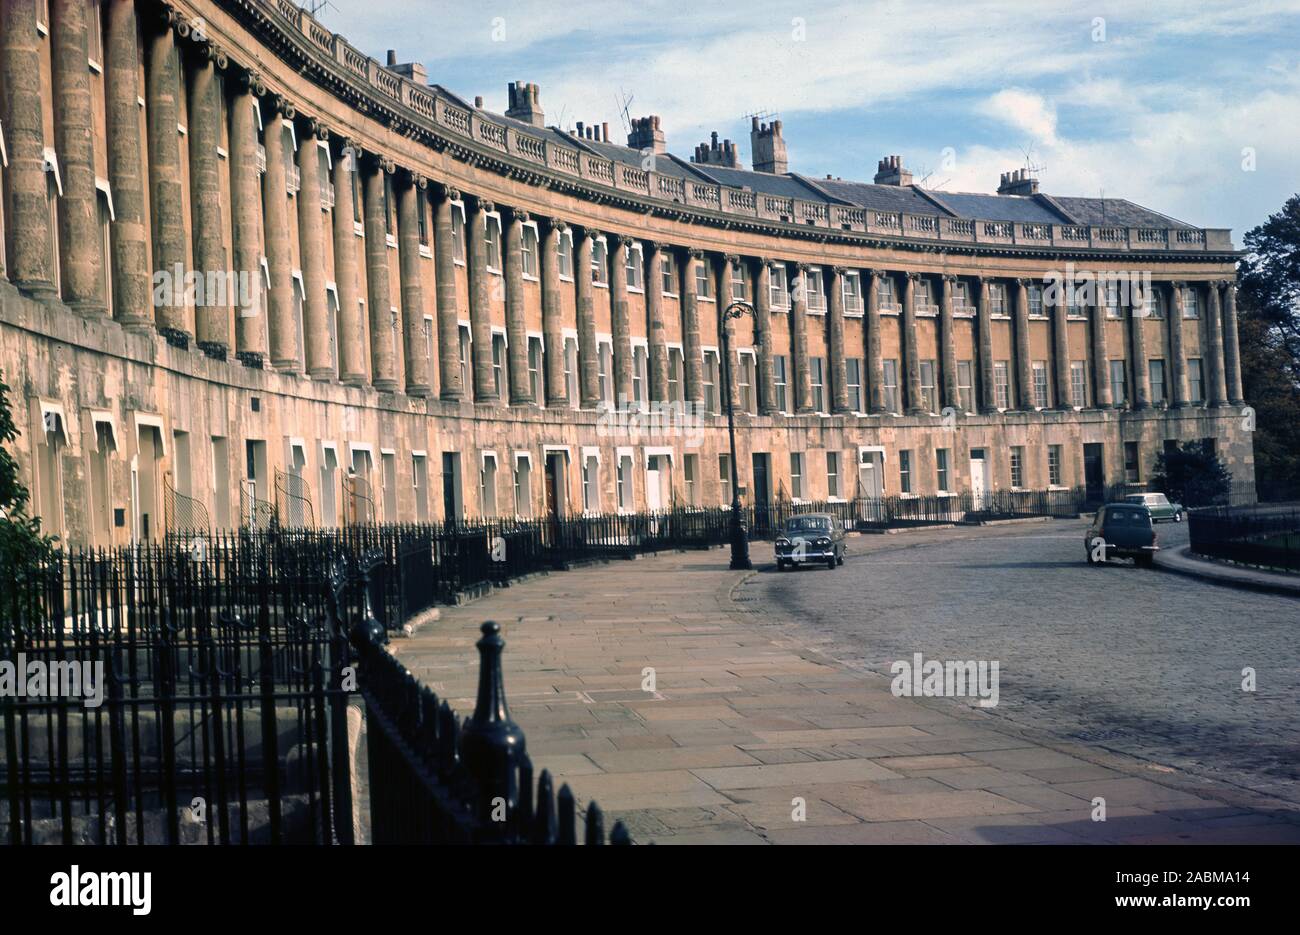 1960s, historical,  a view from this era of Royal Cresent, Bath, England, UK. Completed in 1774, this row of 30 terraced houses laid out in a sweeping crescent in the city by architect John Wood, the younger, is considered one of the greatest examples of Georgian architecture in Britain. Stock Photo